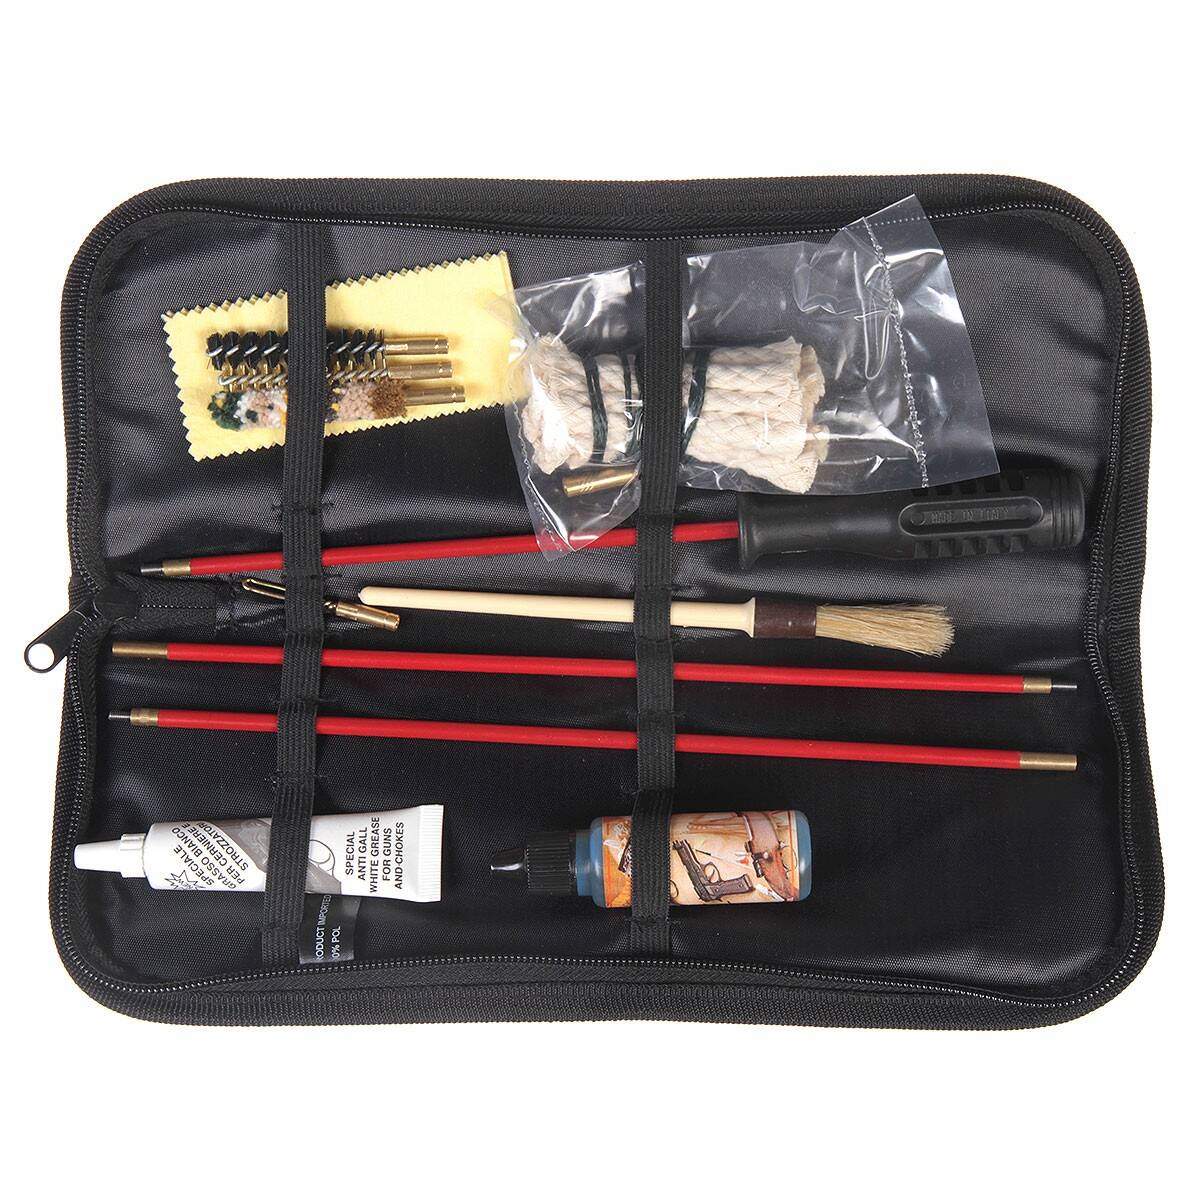 Modular Cleaning Rod Rifle Kit in a Bag